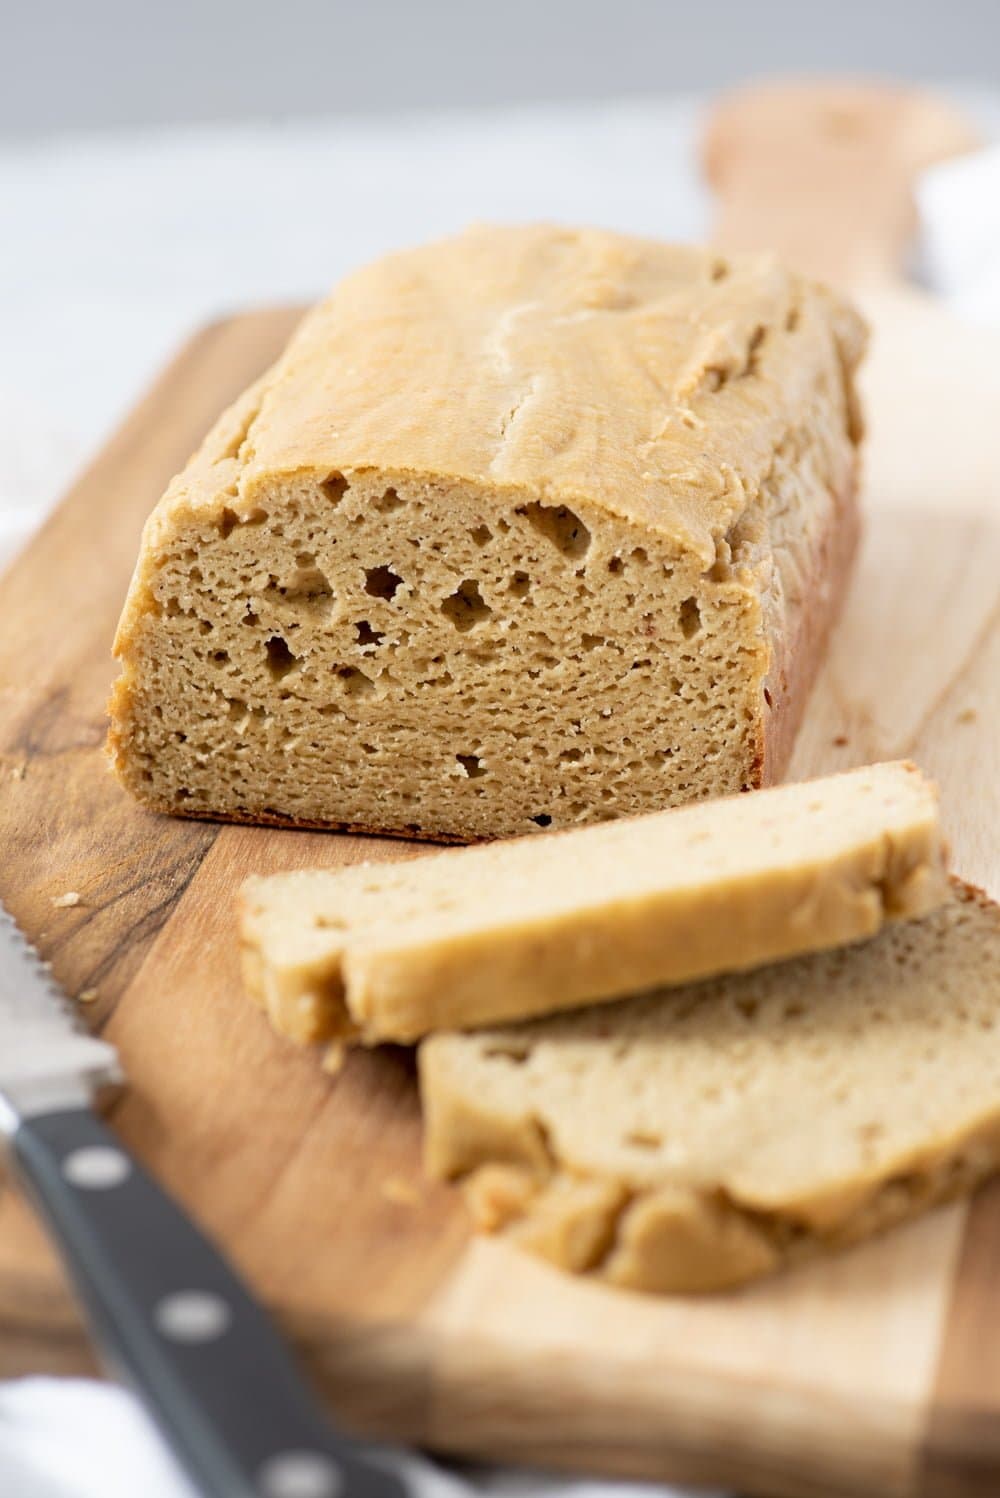 Loaf of Grain-Free Cashew Sandwich Bread with two slices cut off